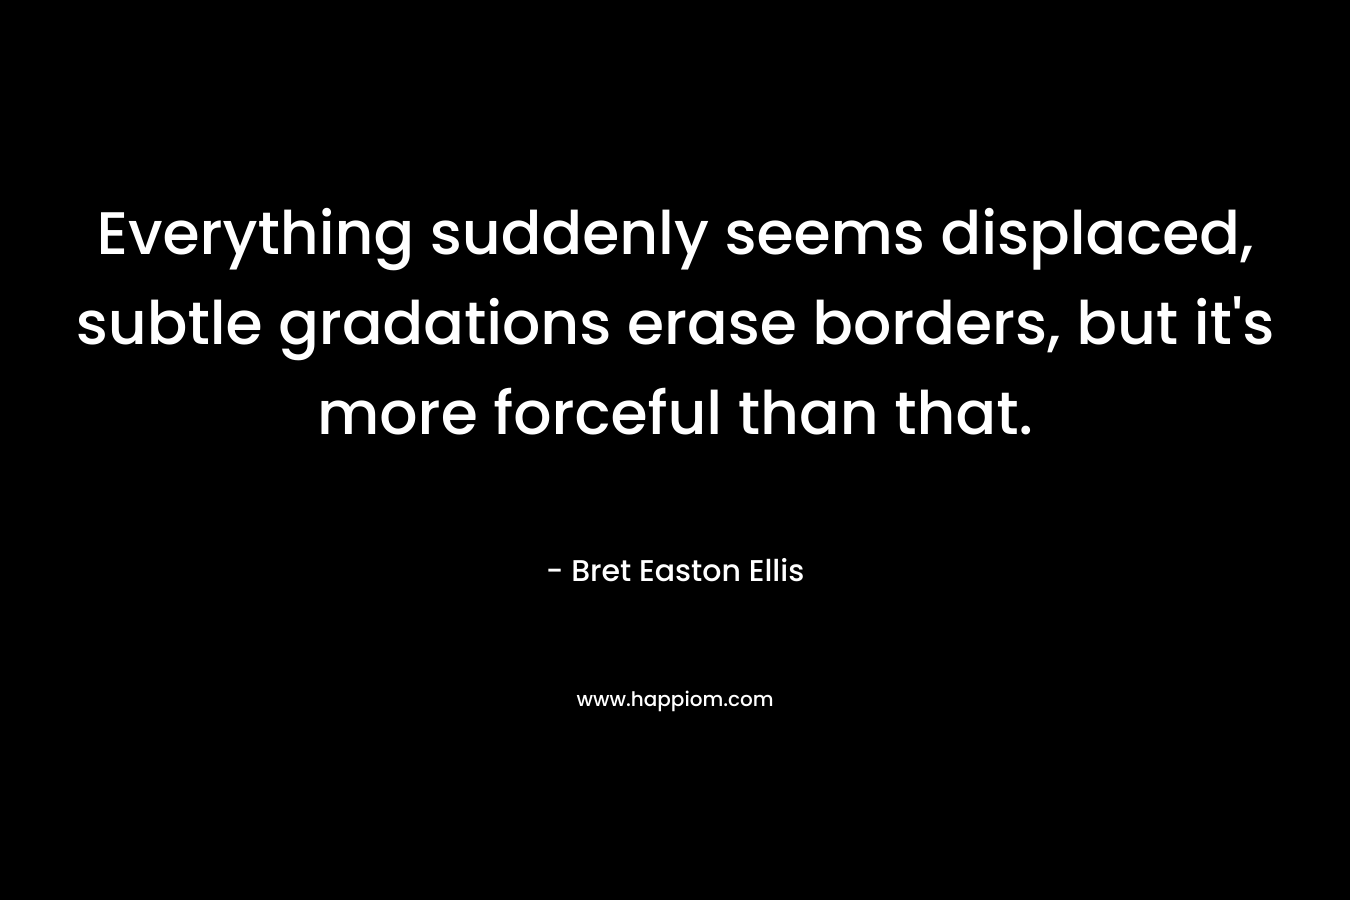 Everything suddenly seems displaced, subtle gradations erase borders, but it’s more forceful than that. – Bret Easton Ellis